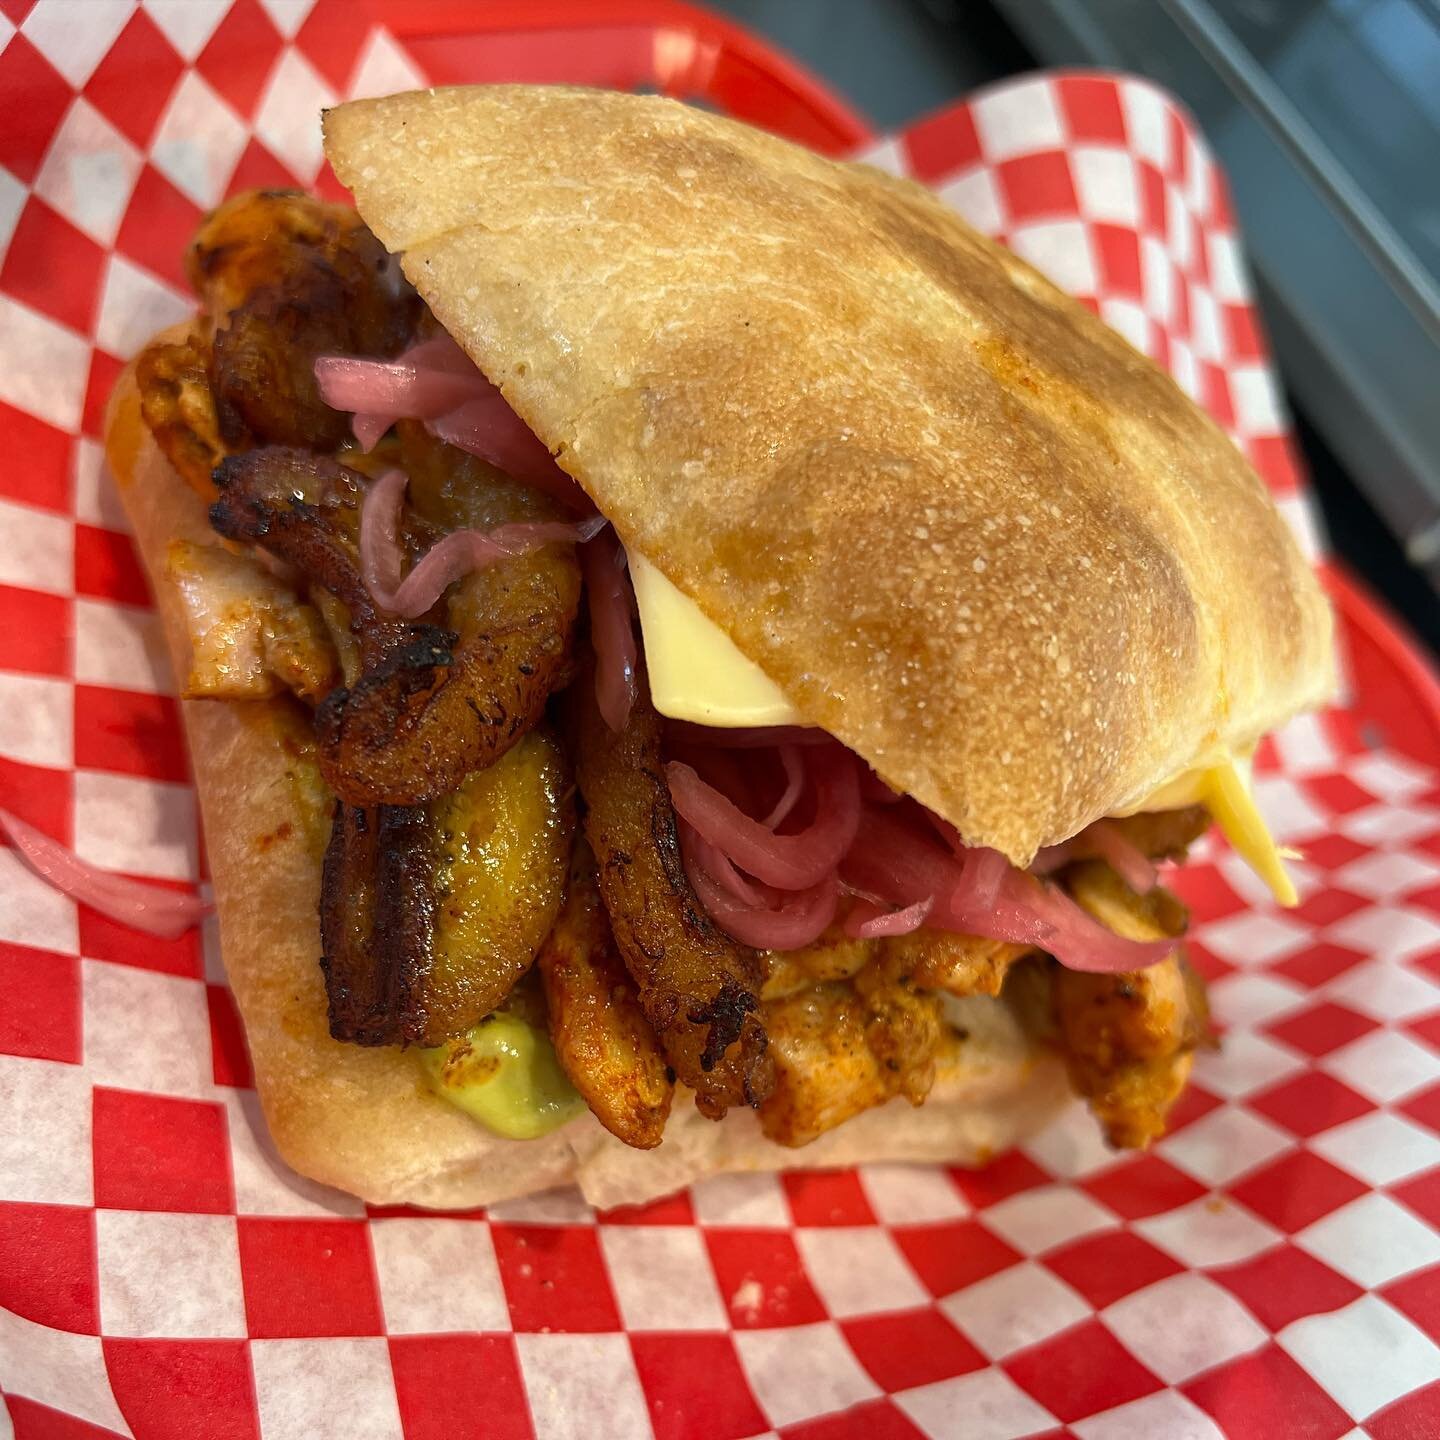 Today&rsquo;s Special 
Grilled Chicken S&aacute;ndwich- 
Plantains, Swiss Cheese, Pickled Onions, Cilantro Mayo 10$

Open from 10:30am-5:30pm

#chicken #sandwich #dailyspecials #special #fw #fortworth #nearsouthside #texas #boca31 #food #foodies #ig